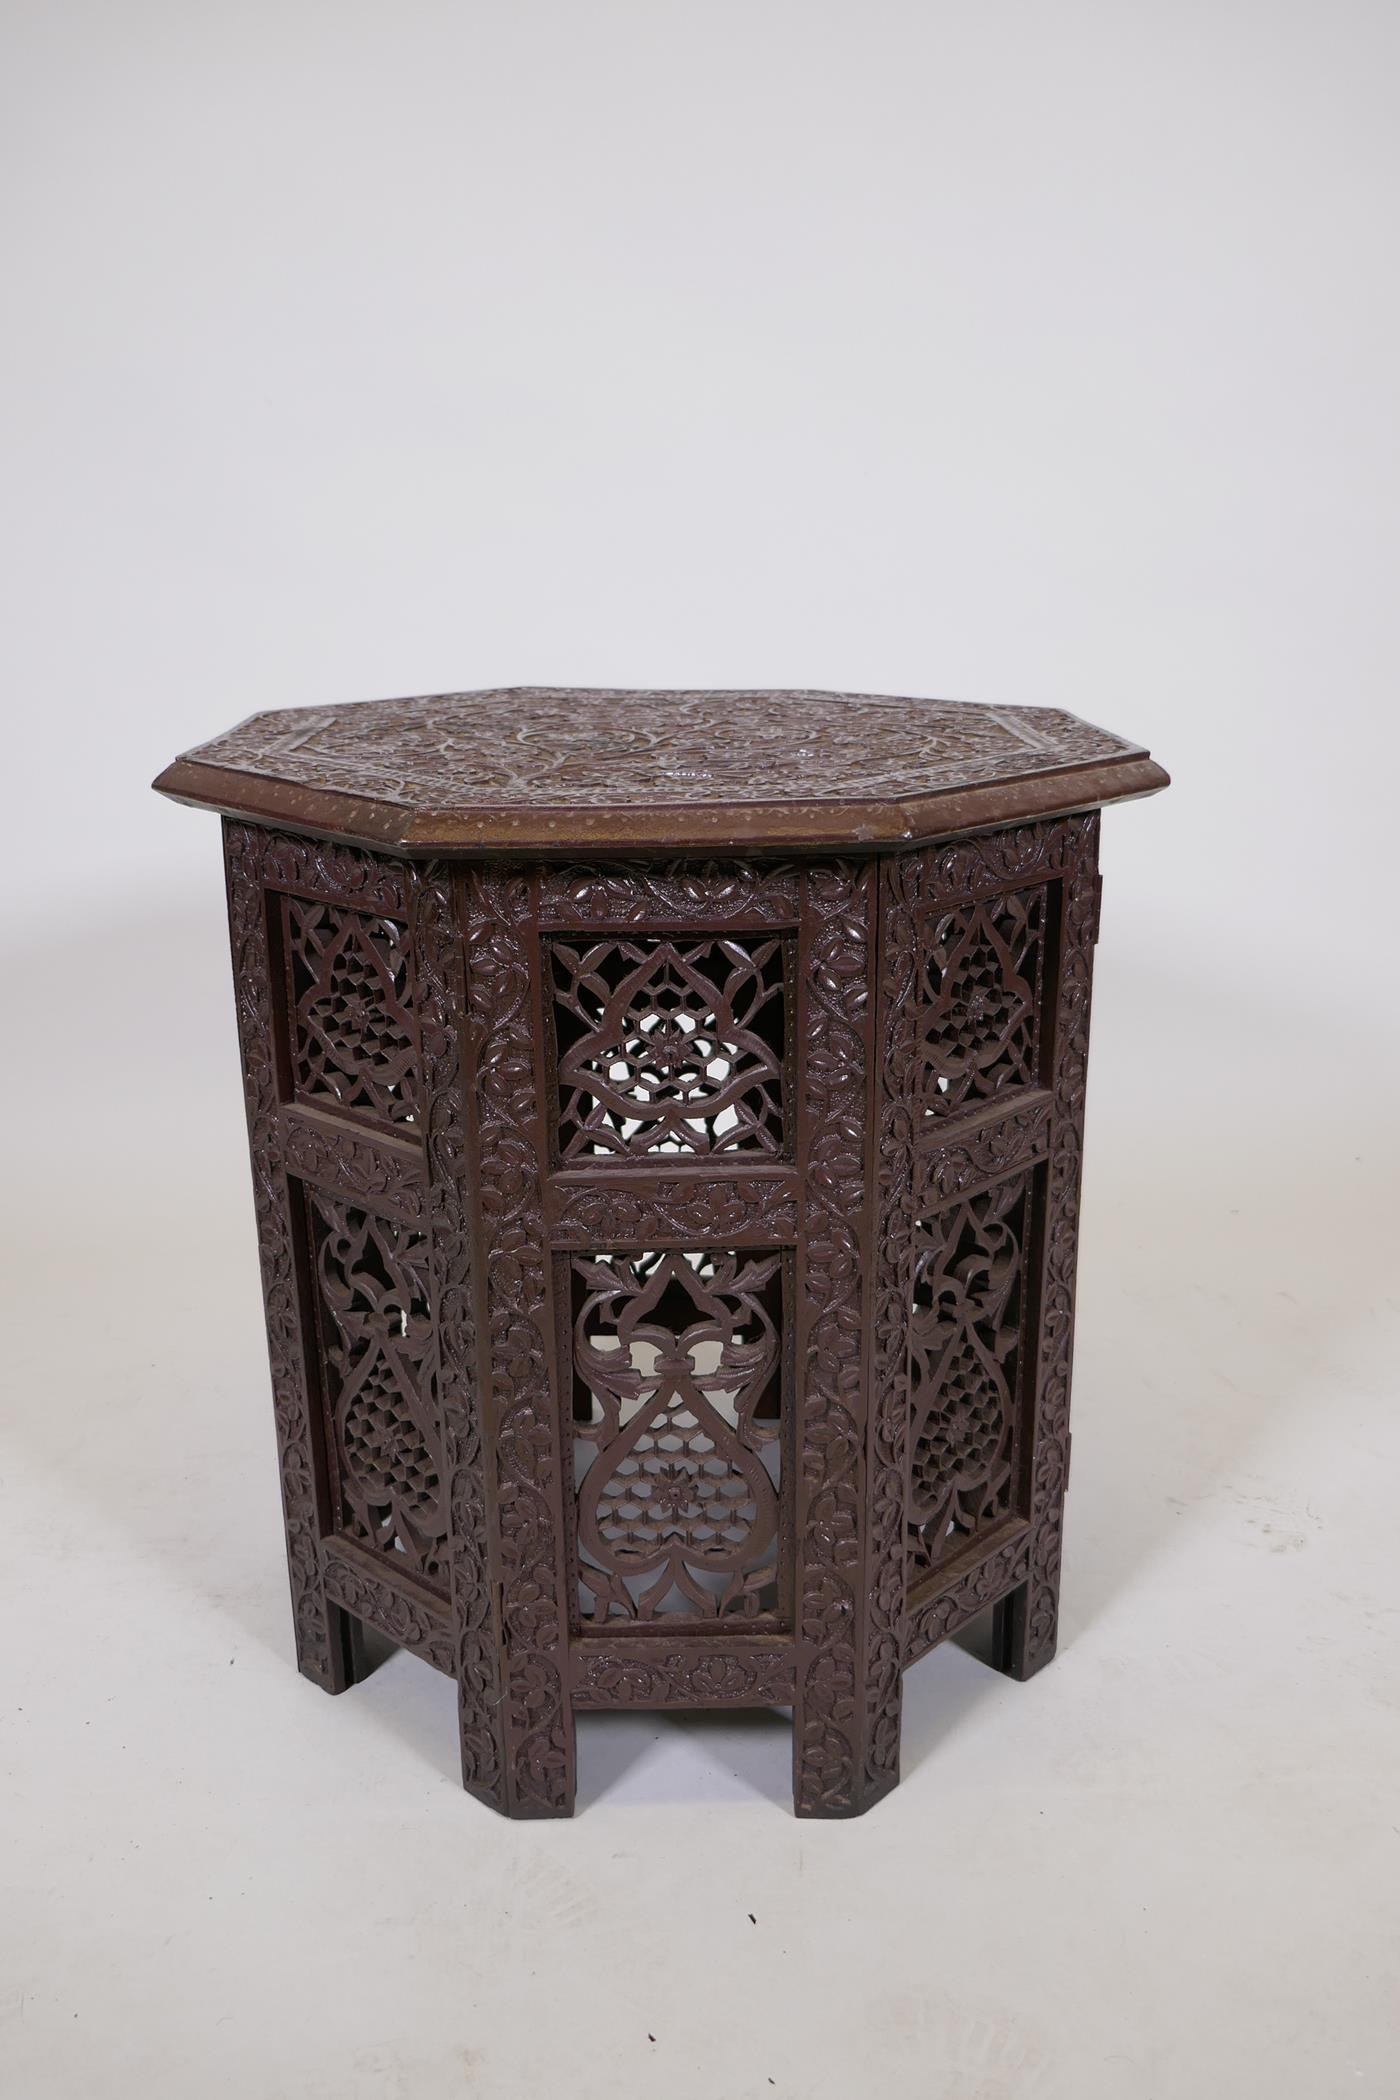 An Indian carved and lacquered wood occasional table, 18" x 18" - Image 2 of 4